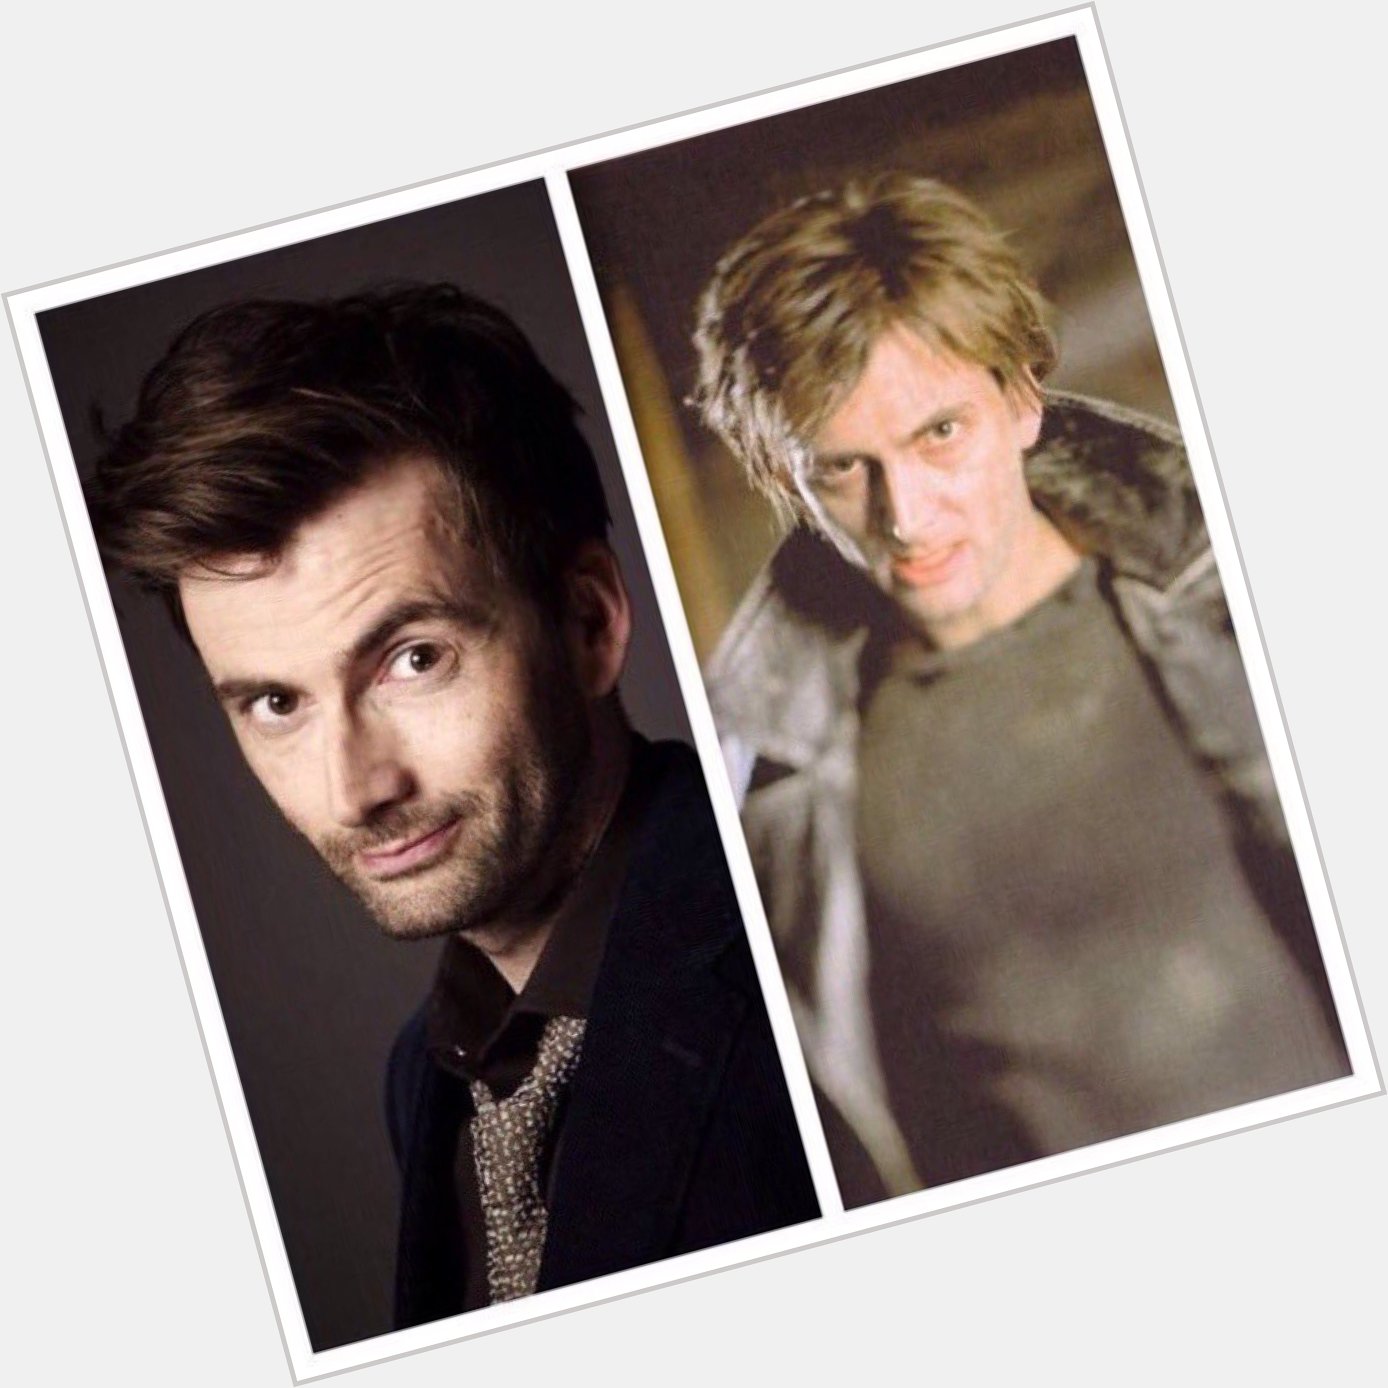 April 18: Happy Birthday, David Tennant! He played Barty Crouch Jr. in the films. 